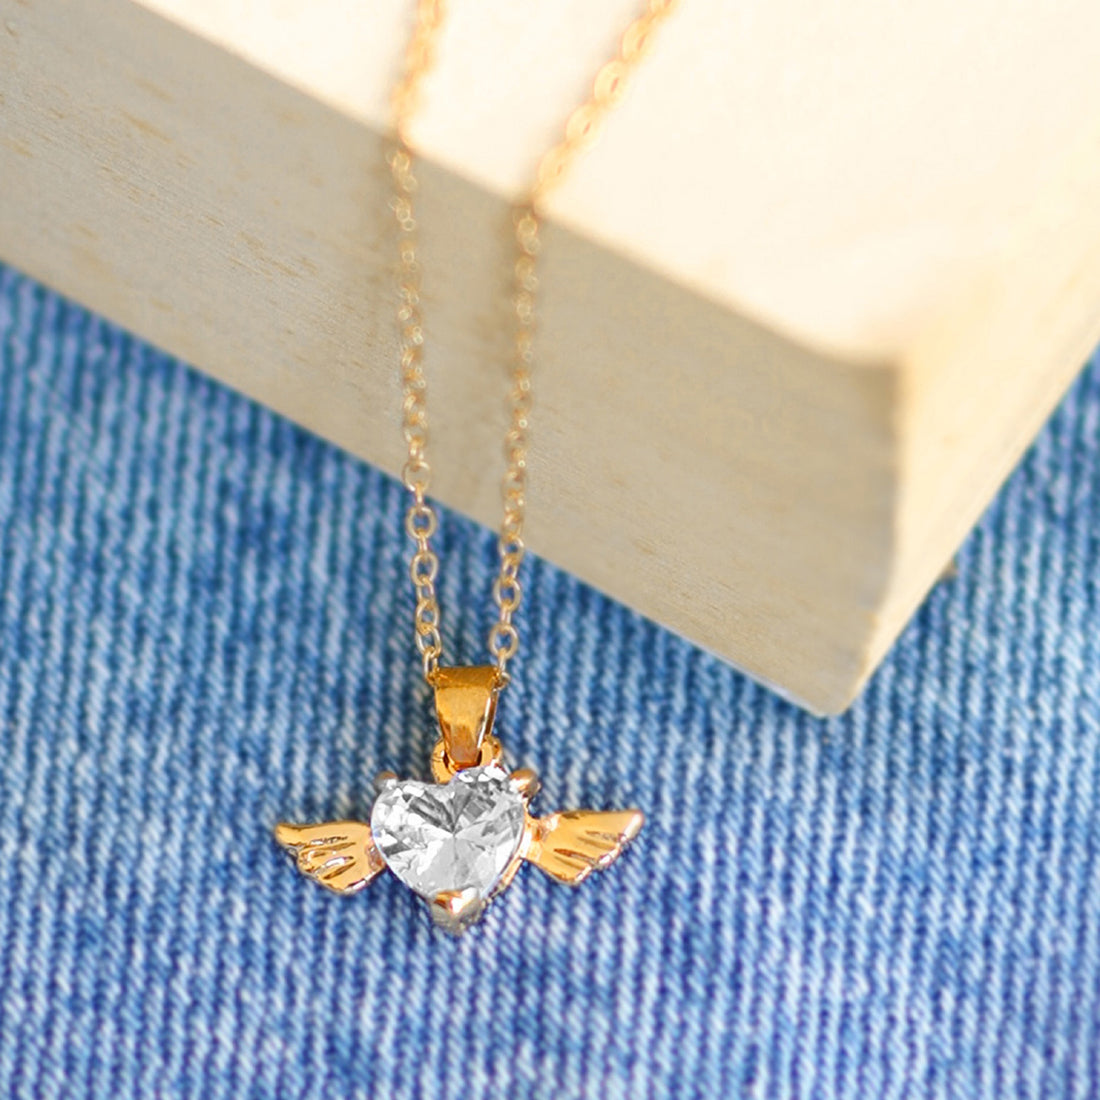 Diamante Heart with Wings Gold-Toned Mini Pendant Necklace